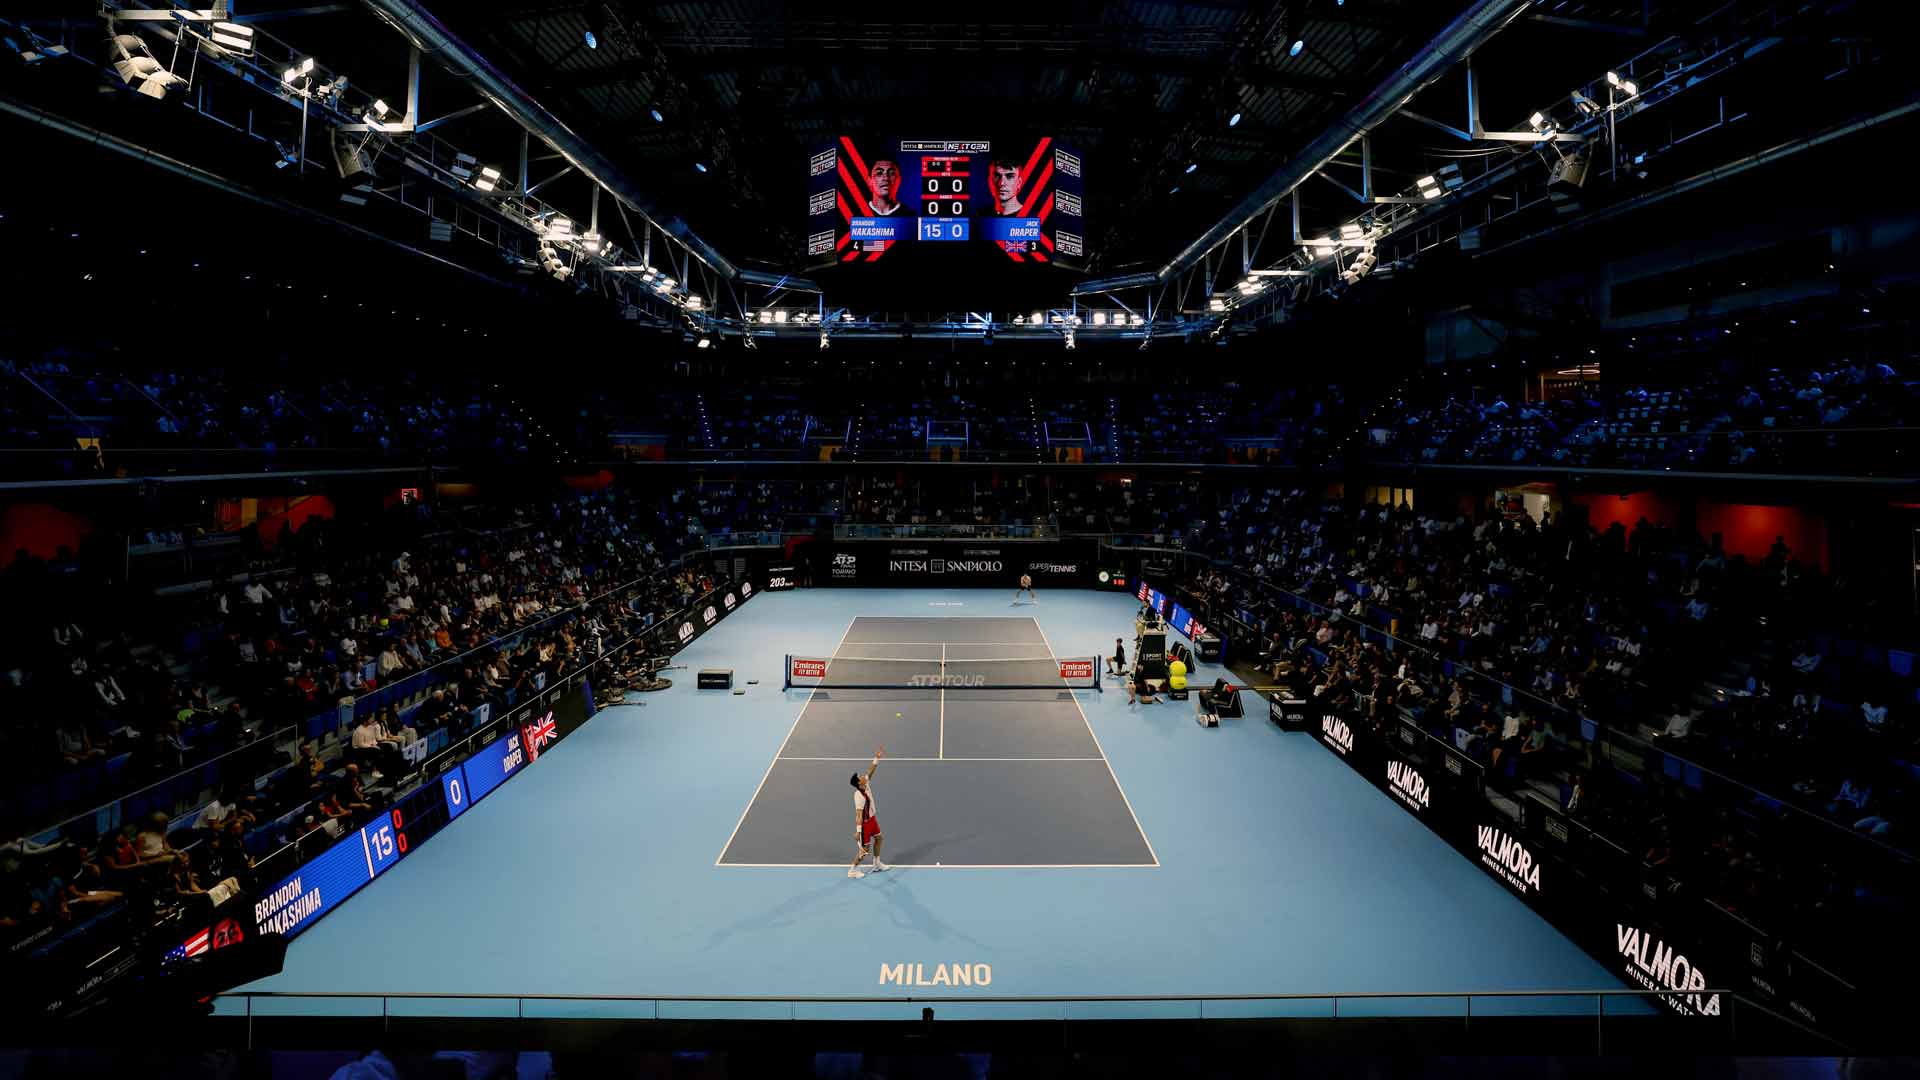 ELC Live was first trialed at the Next Gen ATP Finals in 2017 in Milan.